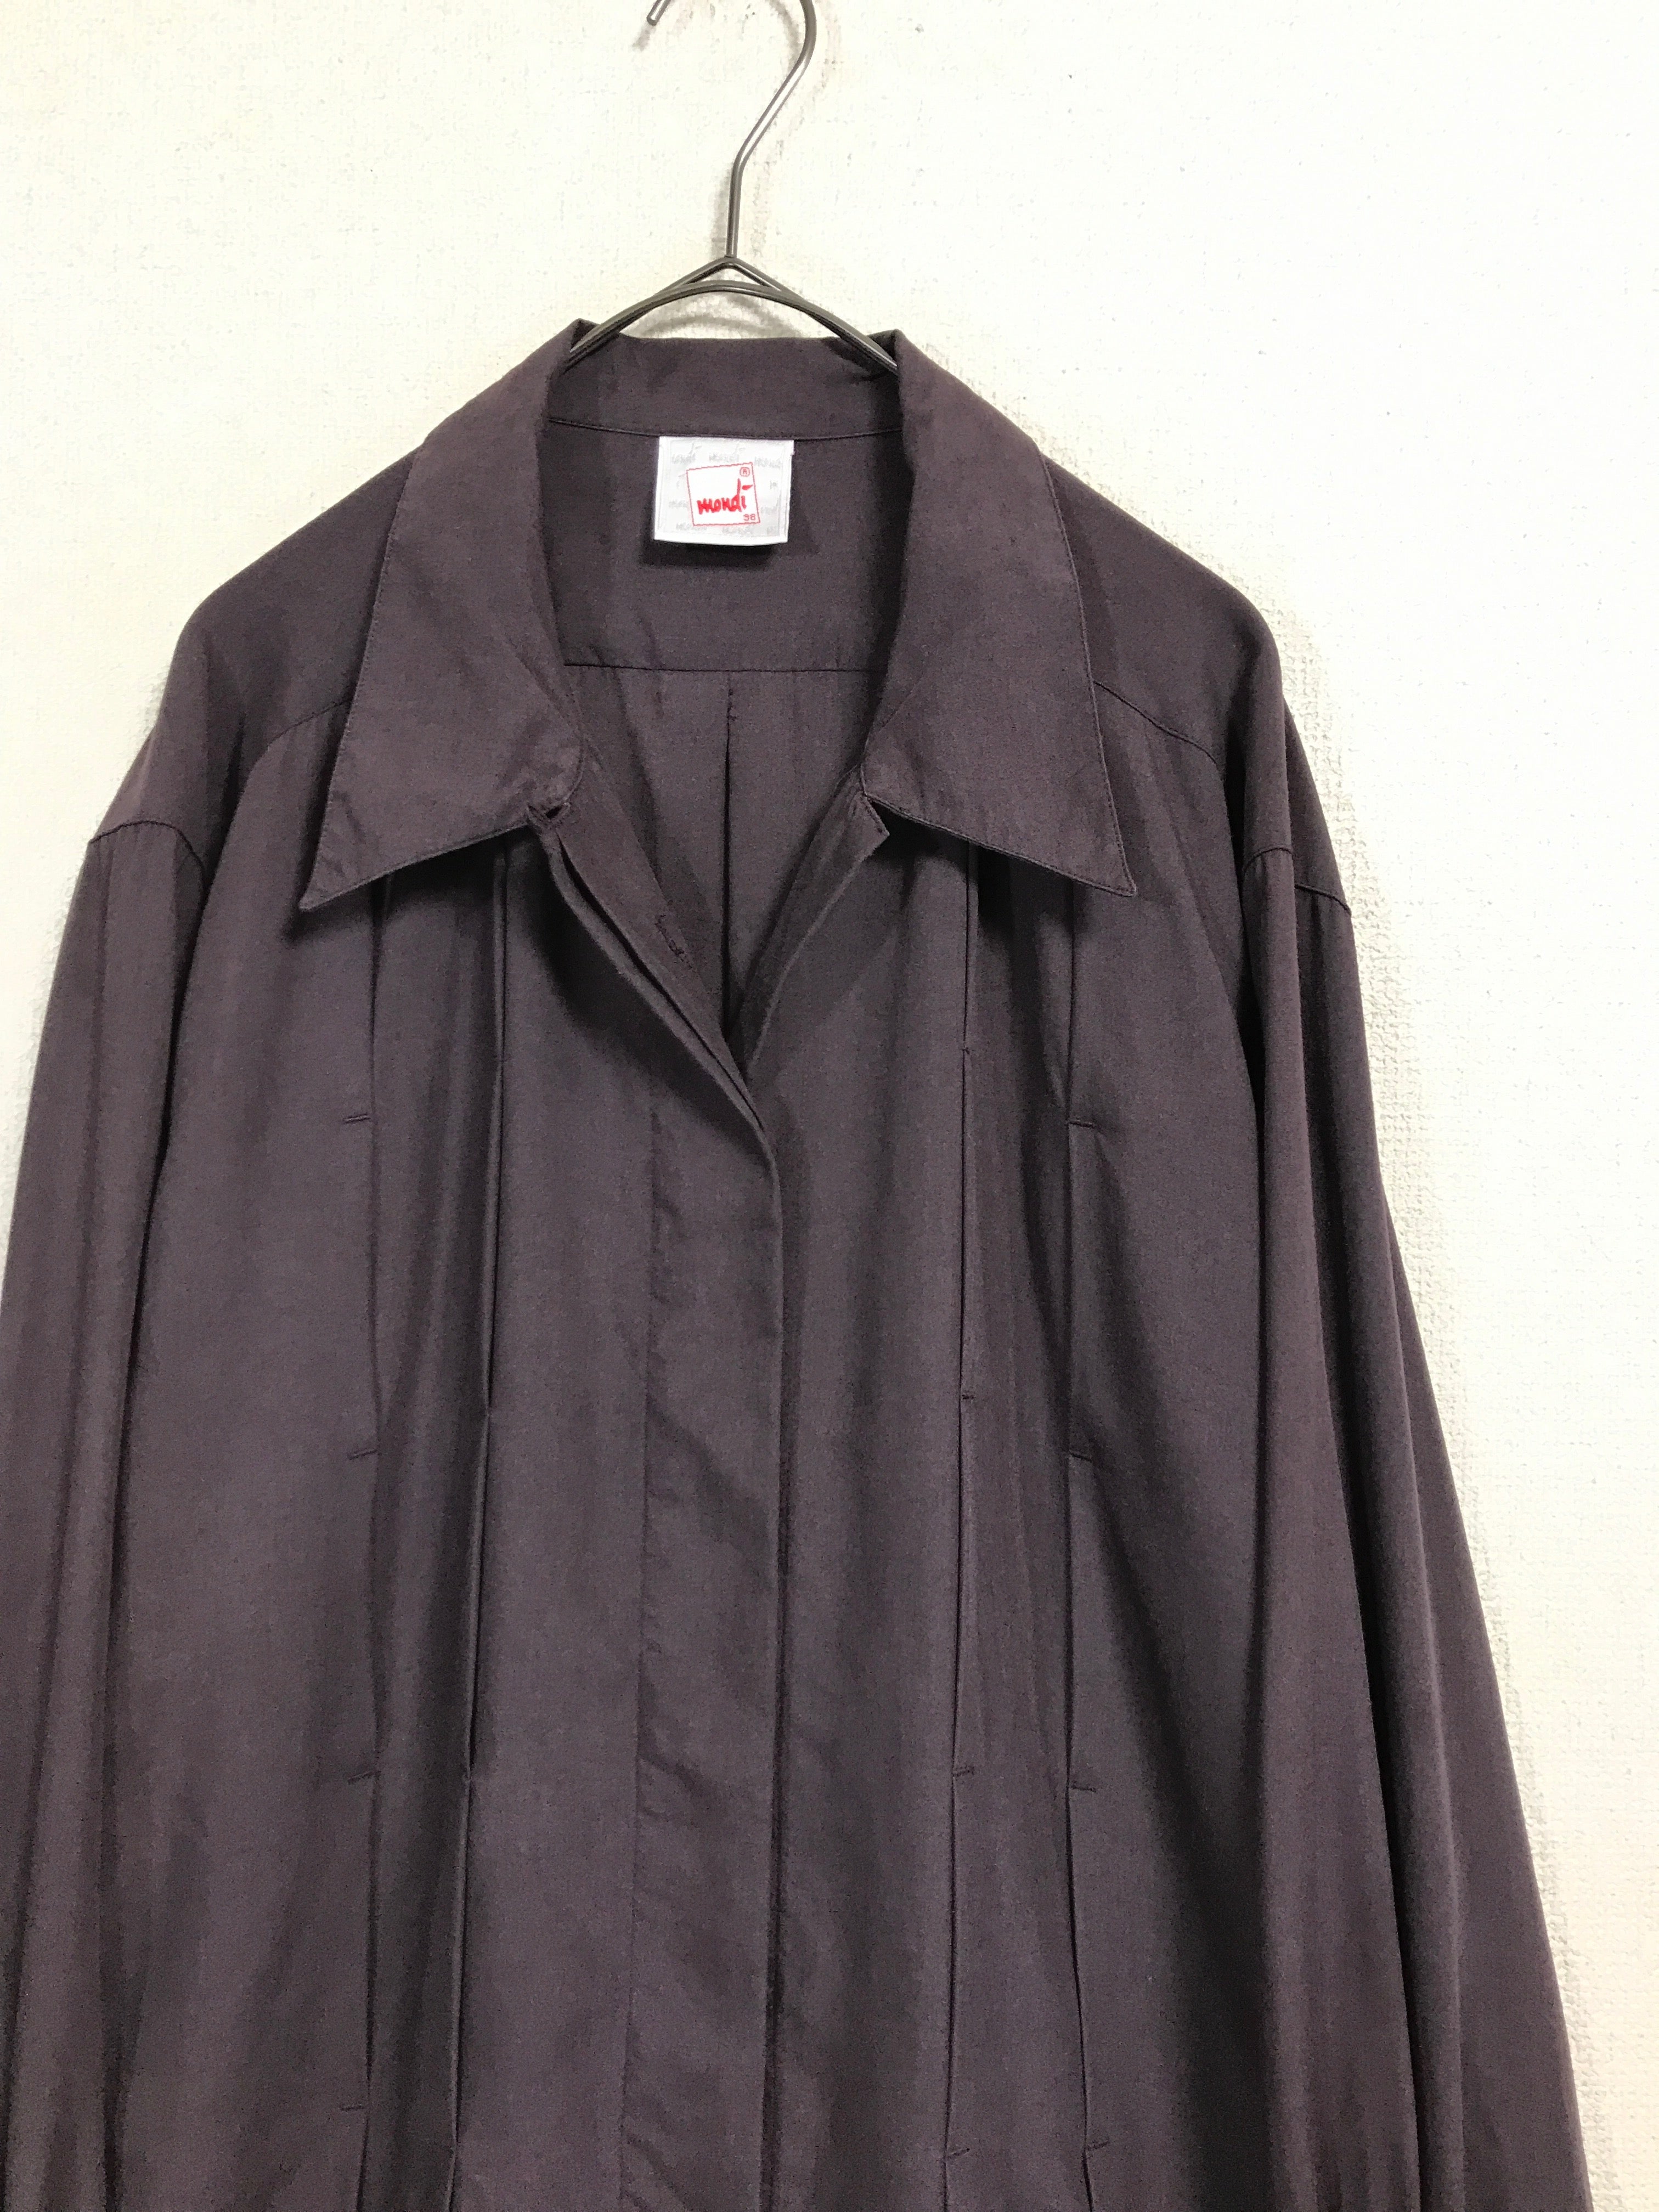 80’s Mondi pleated front rayon blouse from Germany